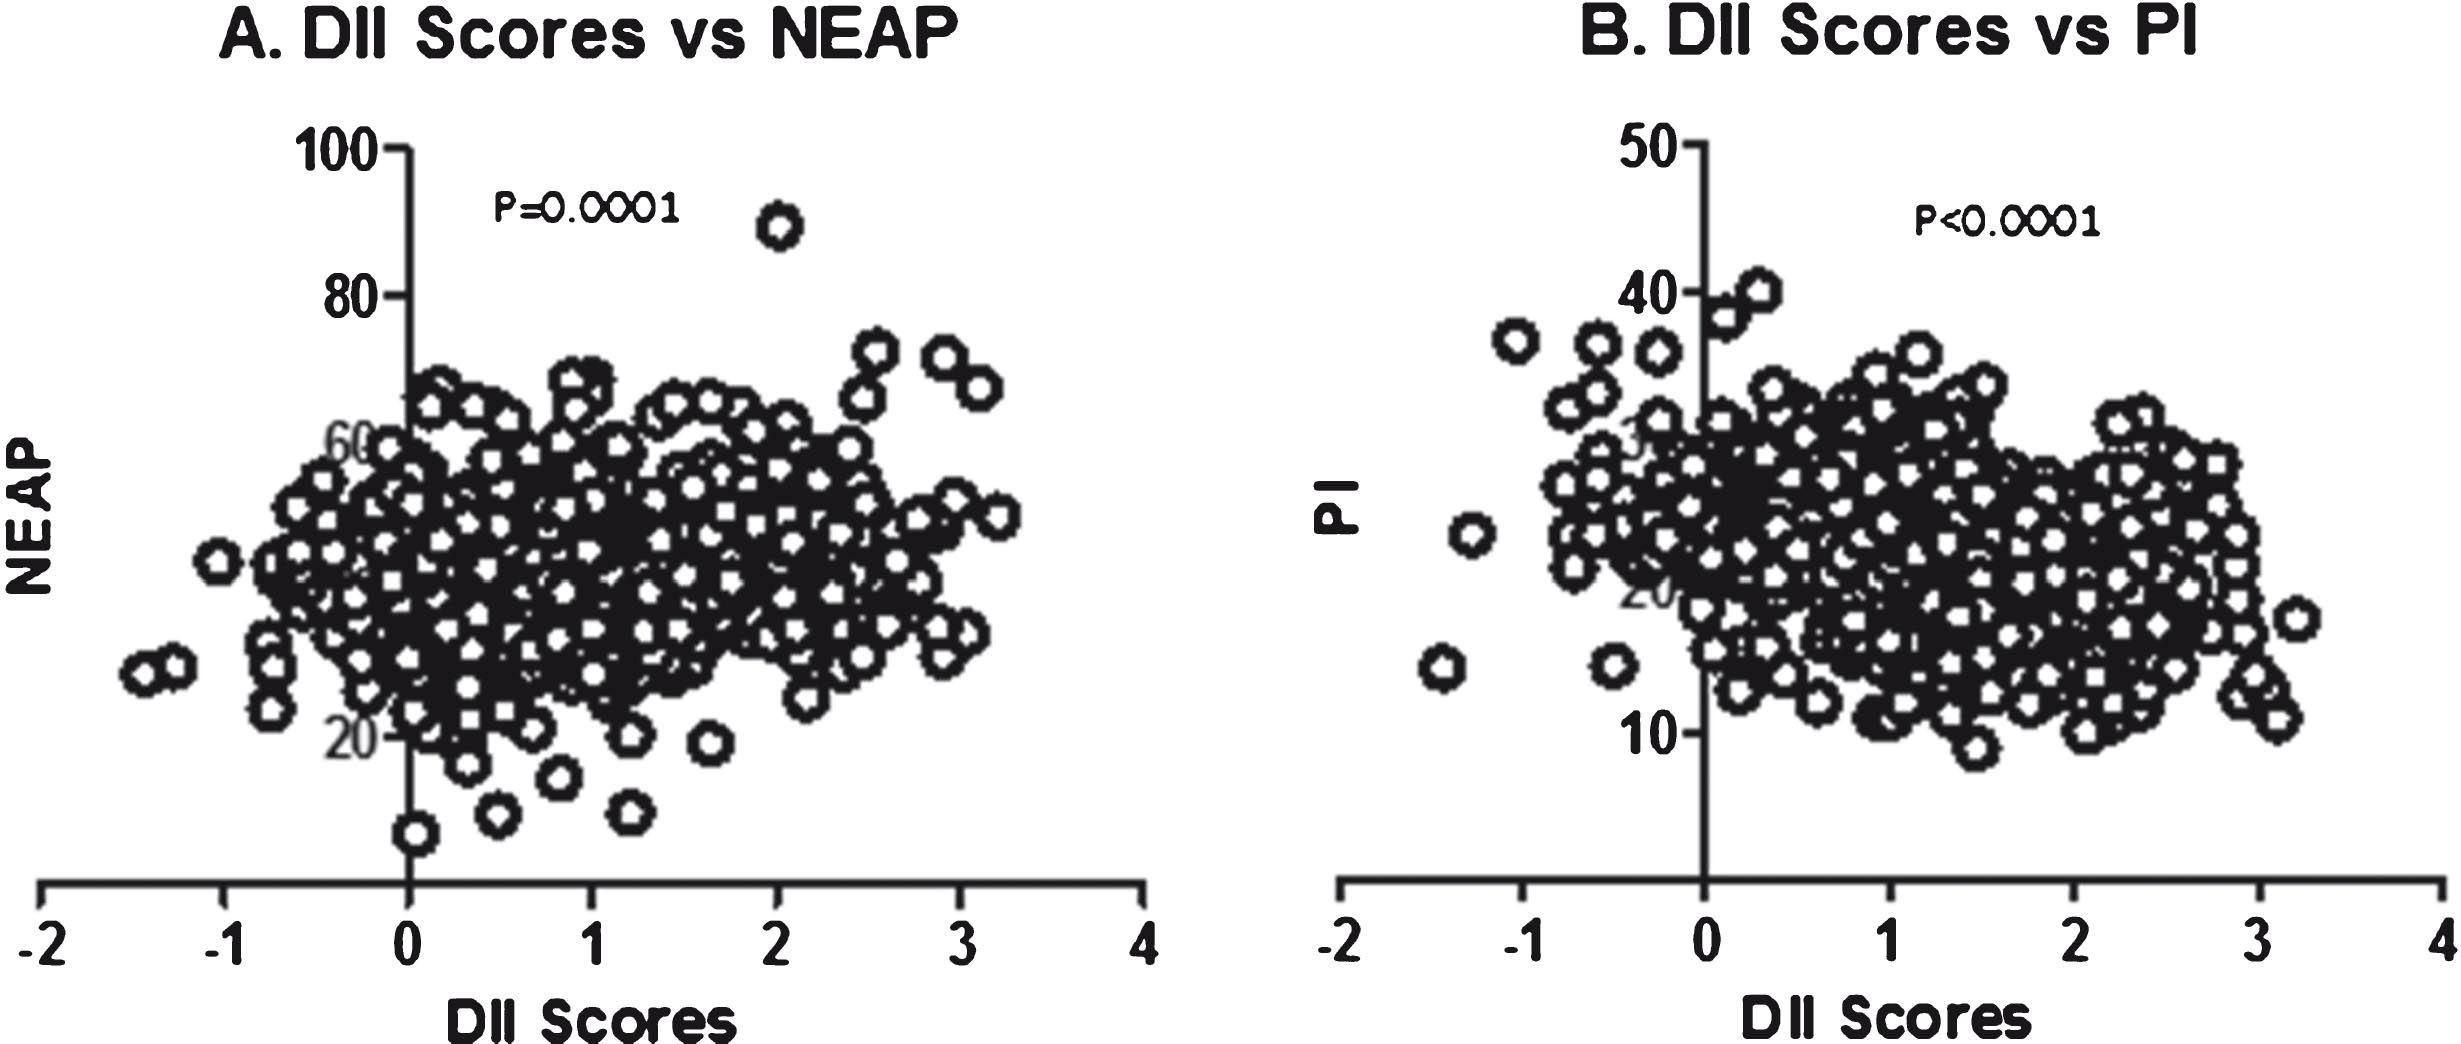 Scatterplot of DII Score Vs NEAP (A) and PI (B).